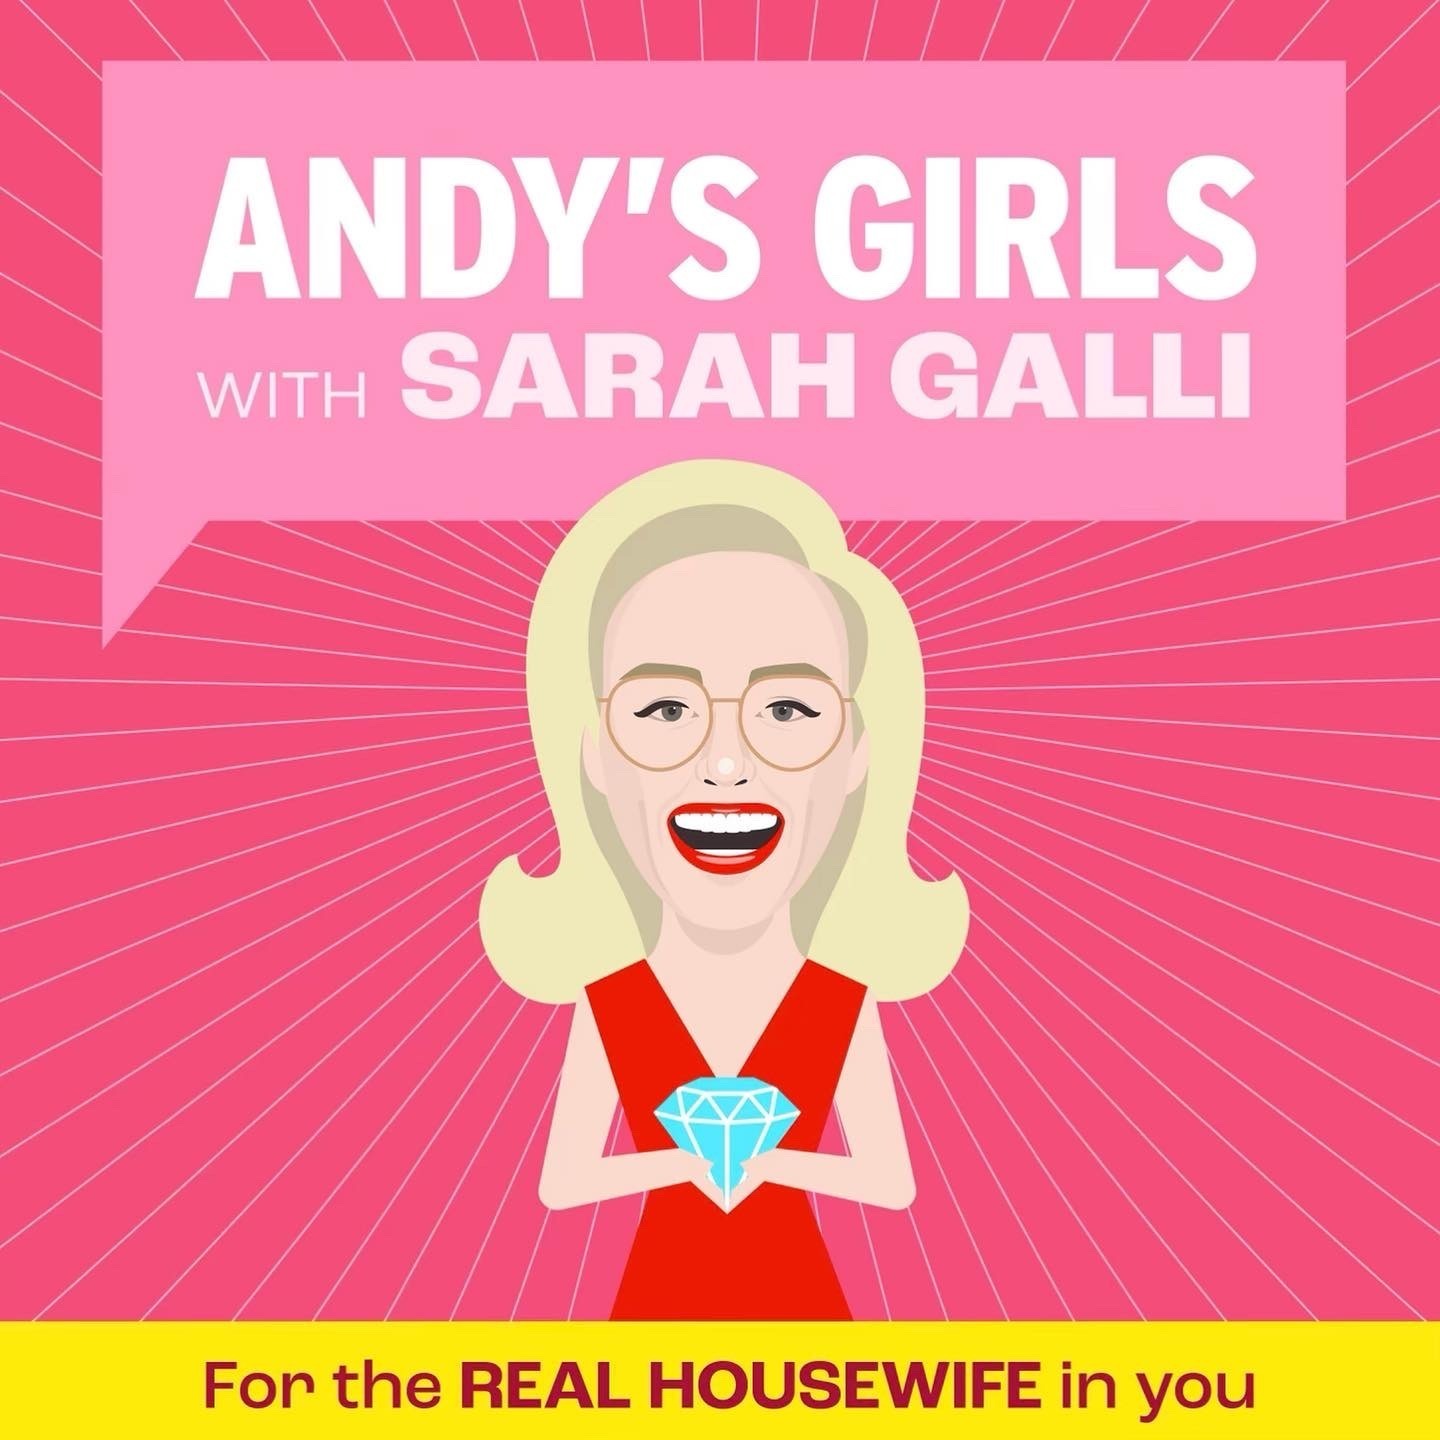 Stephanie Mcmahon Hatel Fuckin Full Sex Video - Andy's Girls: A Real Housewives Podcast | RedCircle